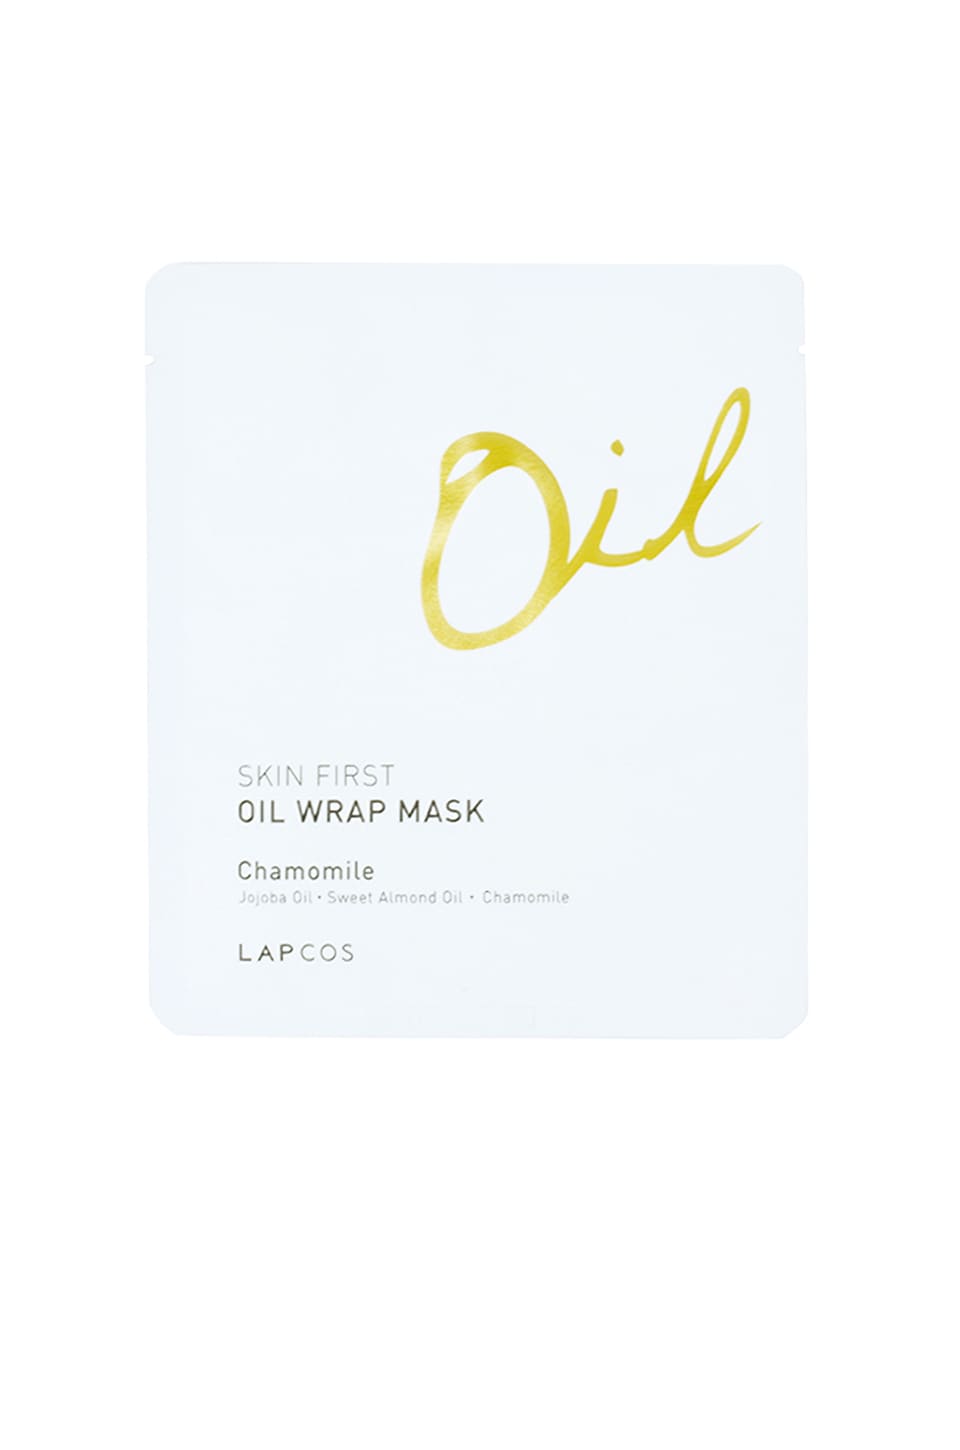 LAPCOS LAPCOS SKIN FIRST OIL WRAP MASK NO 2 IN BEAUTY: NA.,LCOS-WU24